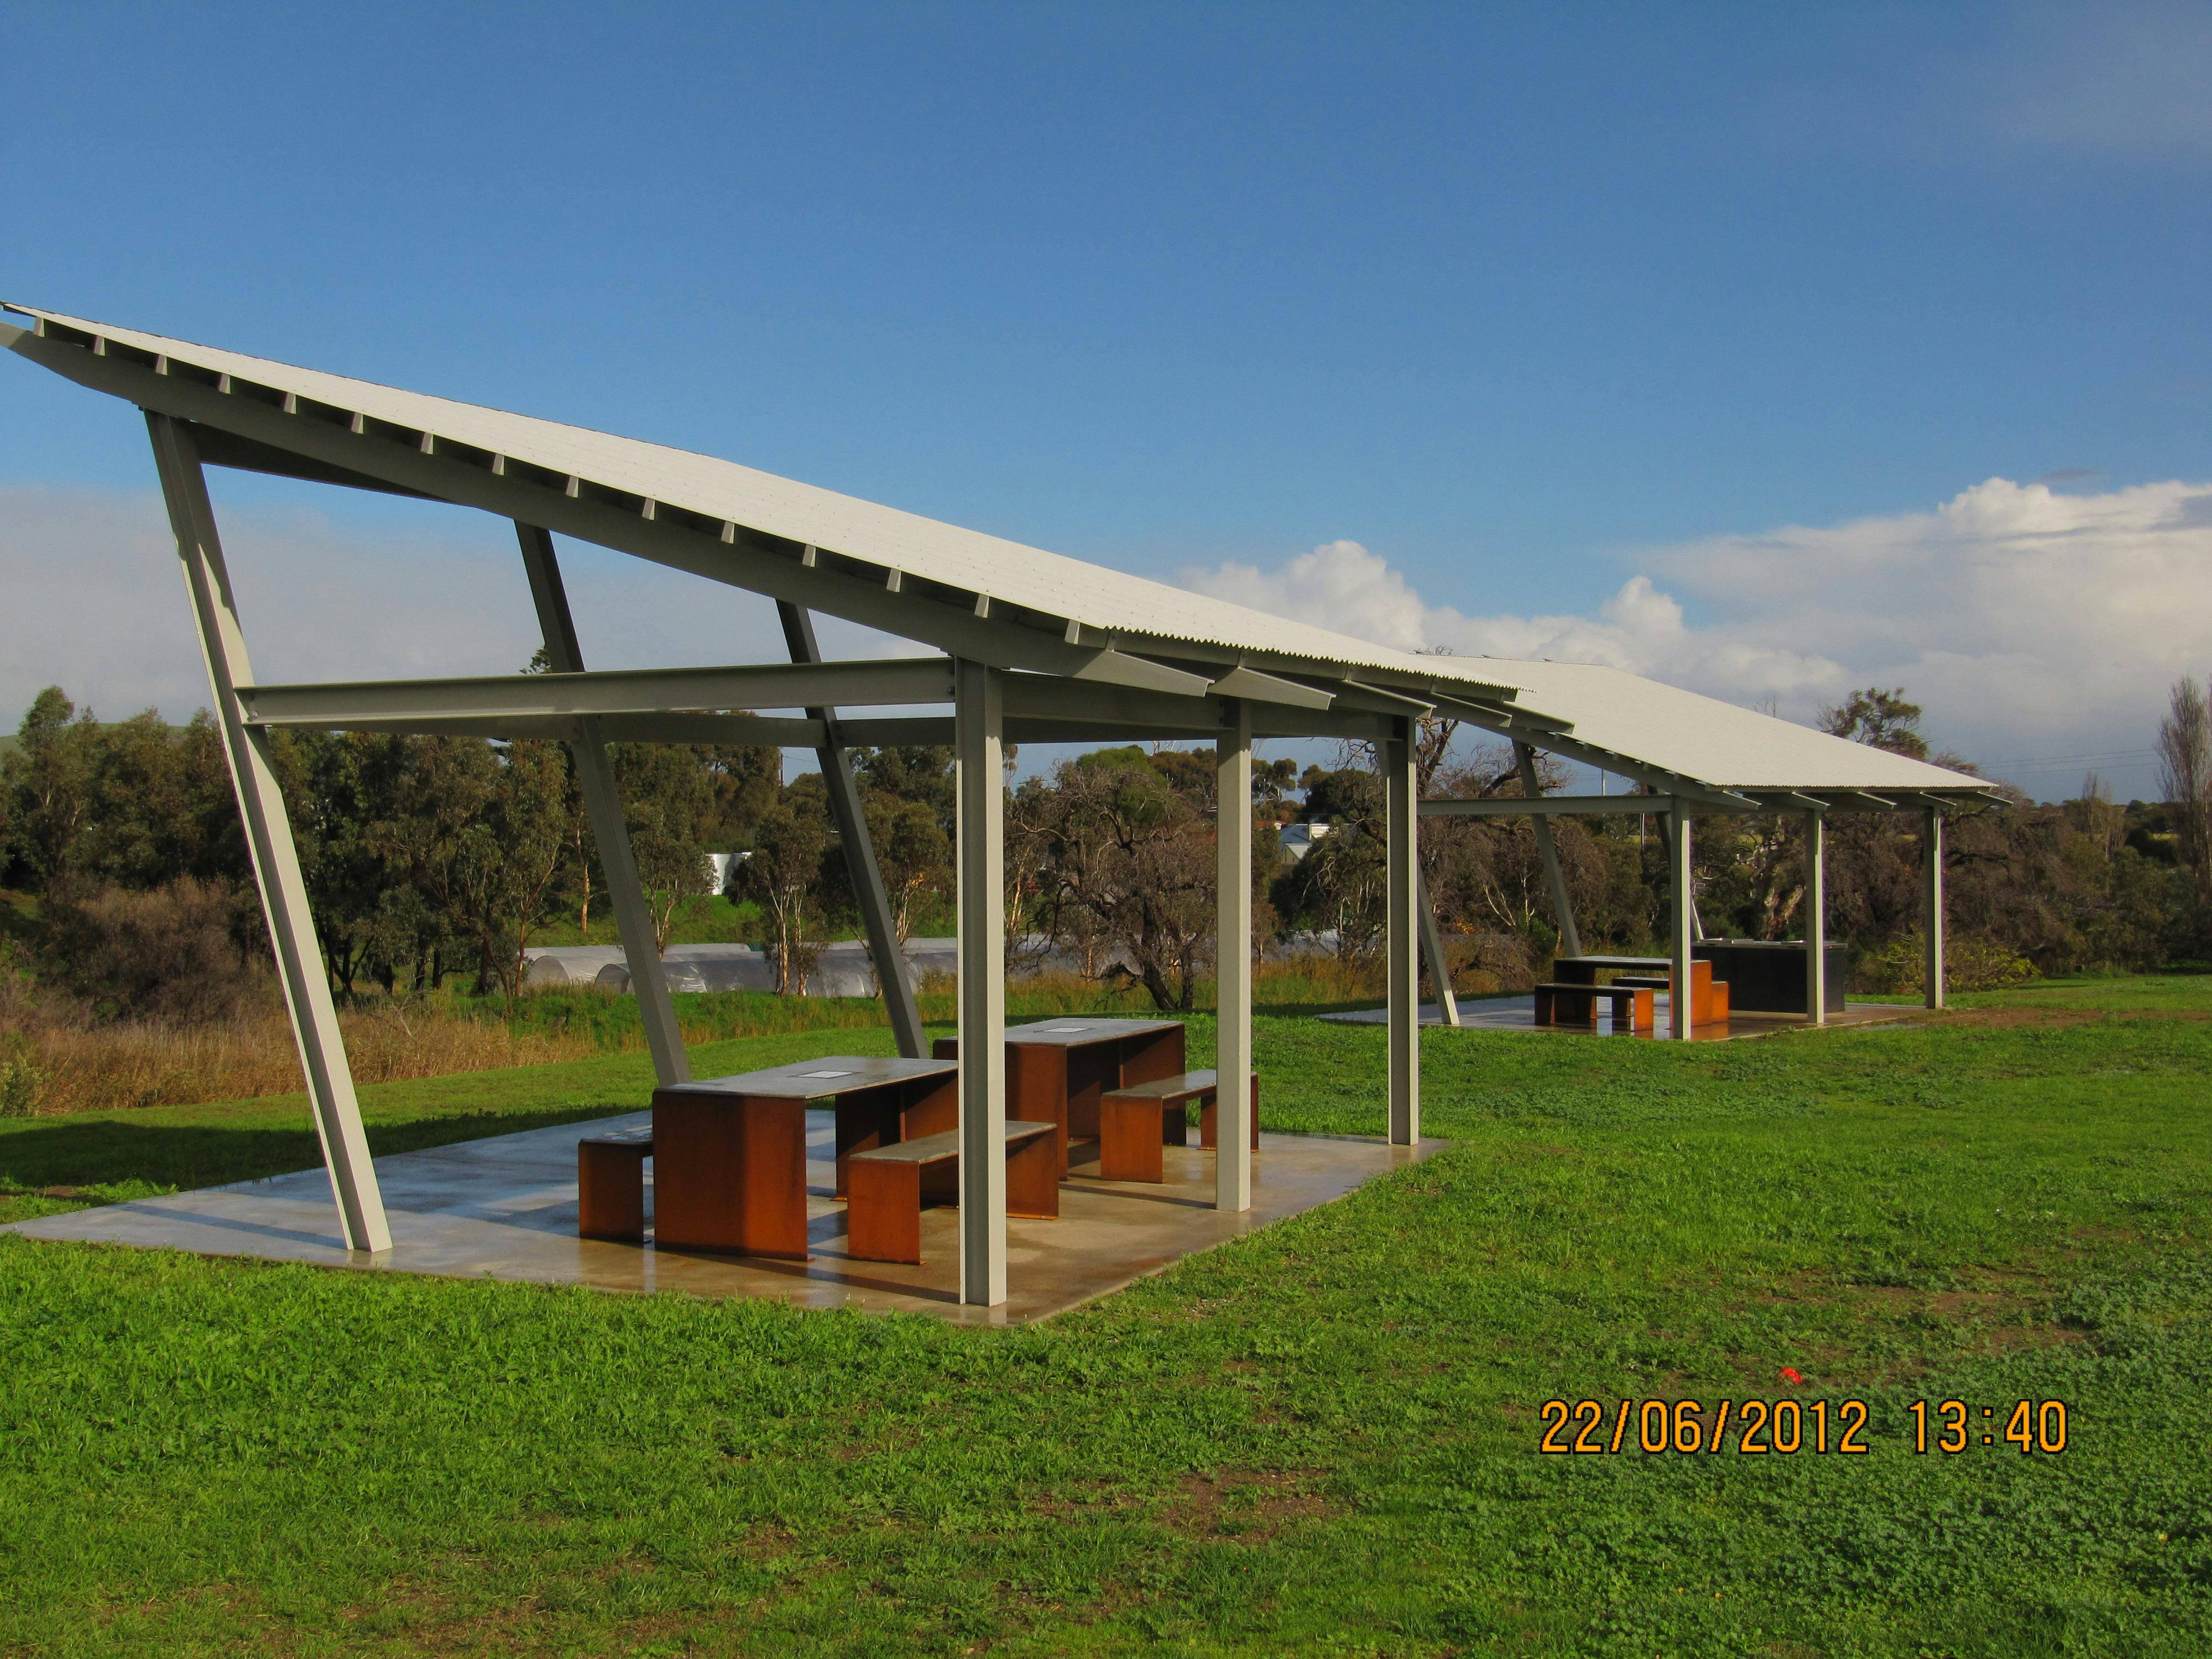 Existing shelters and barbecue facilities in the park